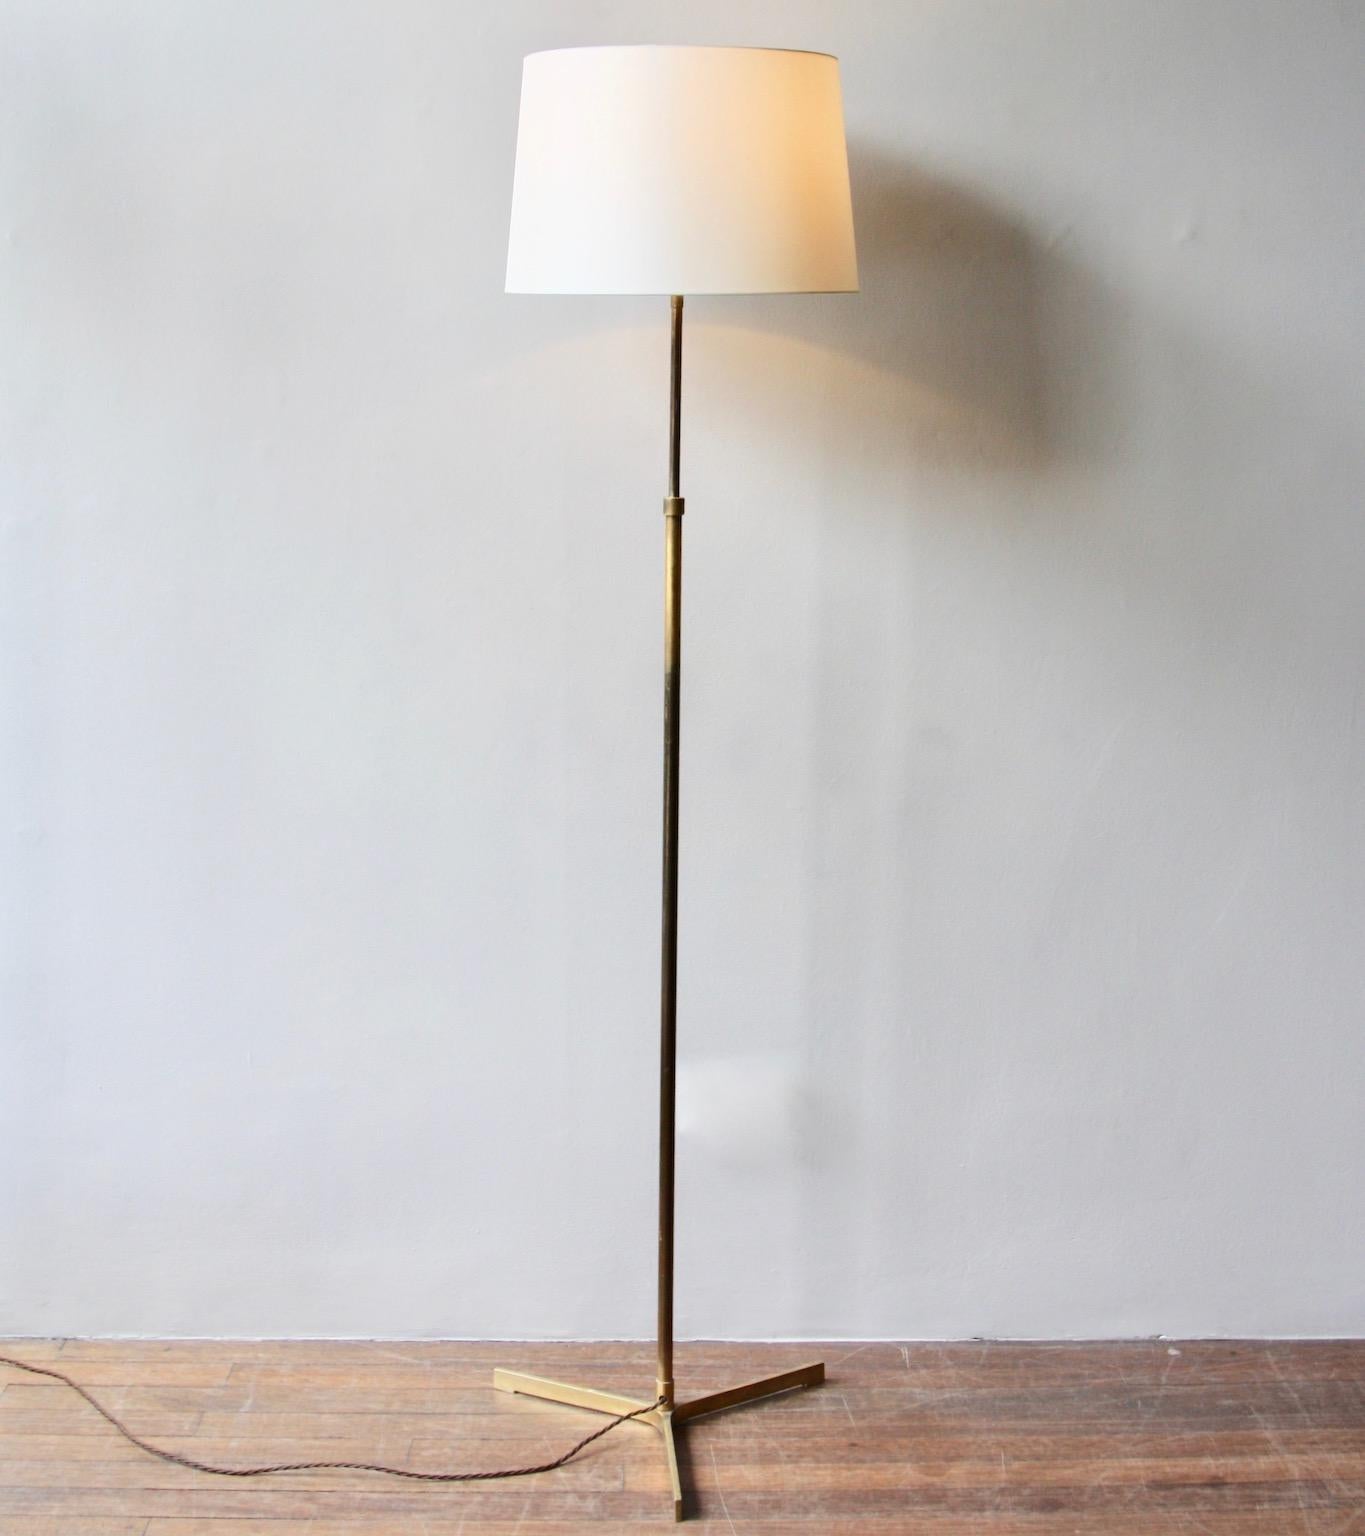 A vintage floor lamp made purely of brass in Denmark, circa 1960.
The light is made up of three simple sections; a'crows foot' base a thick central shaft and, lastly, a more slender pole. Connecting the aforementioned sections are two collars which